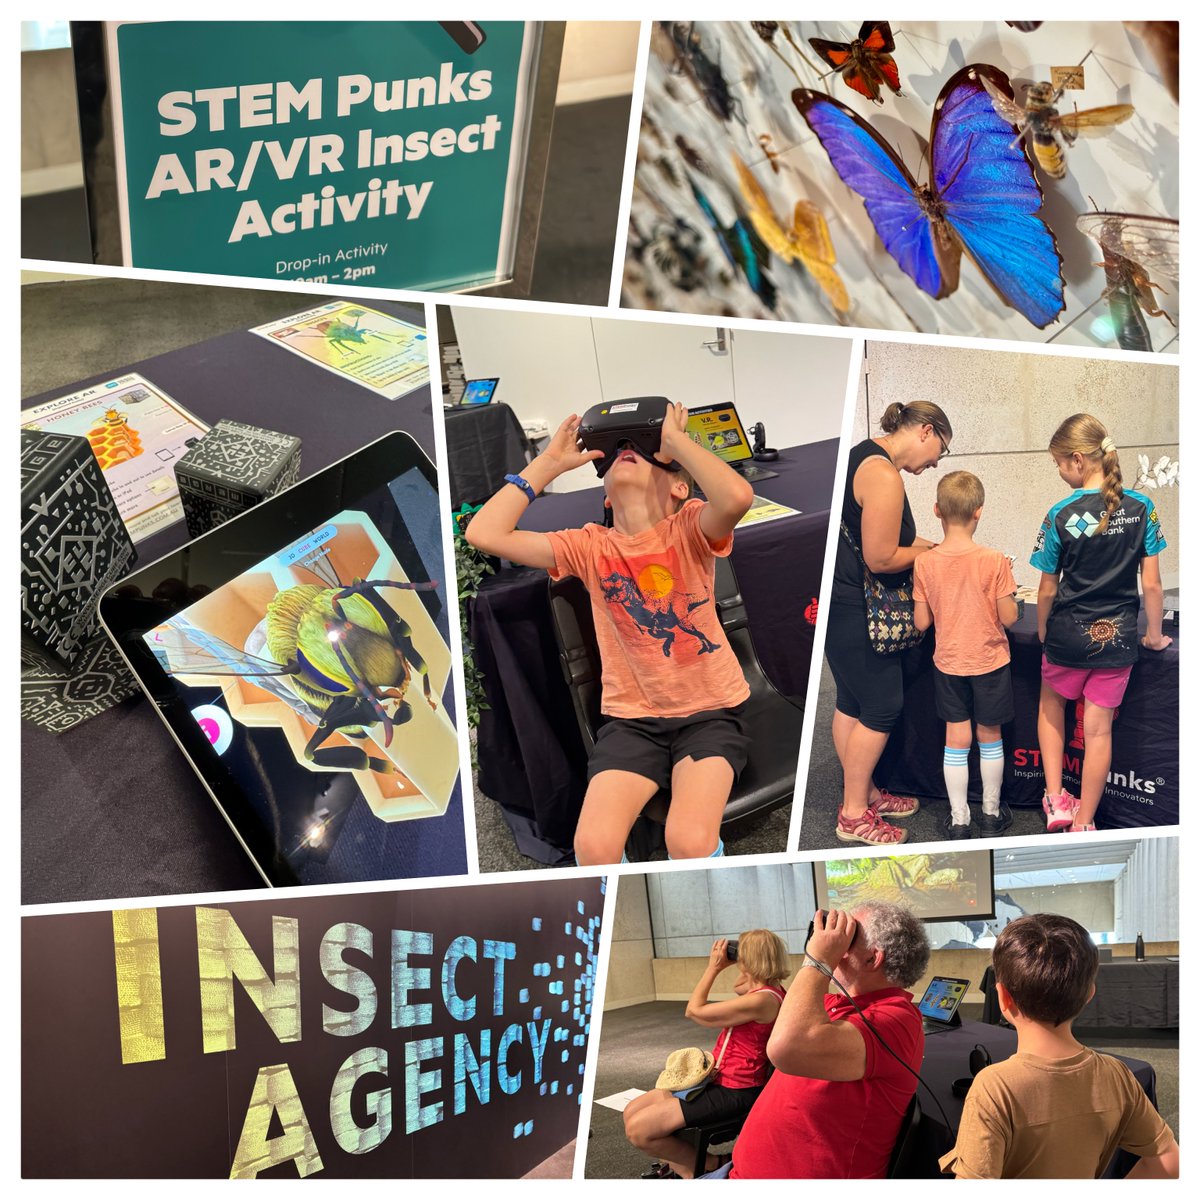 STEM Punks has spent 2 days this week at @qldmuseum Bug Fair 🐞 🐛. Over 300 people went hands on with our guided Augmented and Virtual Reality experiences via @mergeedu Cubes and Oculus VR. What a great way wrap up the Australian school holidays! 

#ARVRinEdu #STEM #SpatialEdu